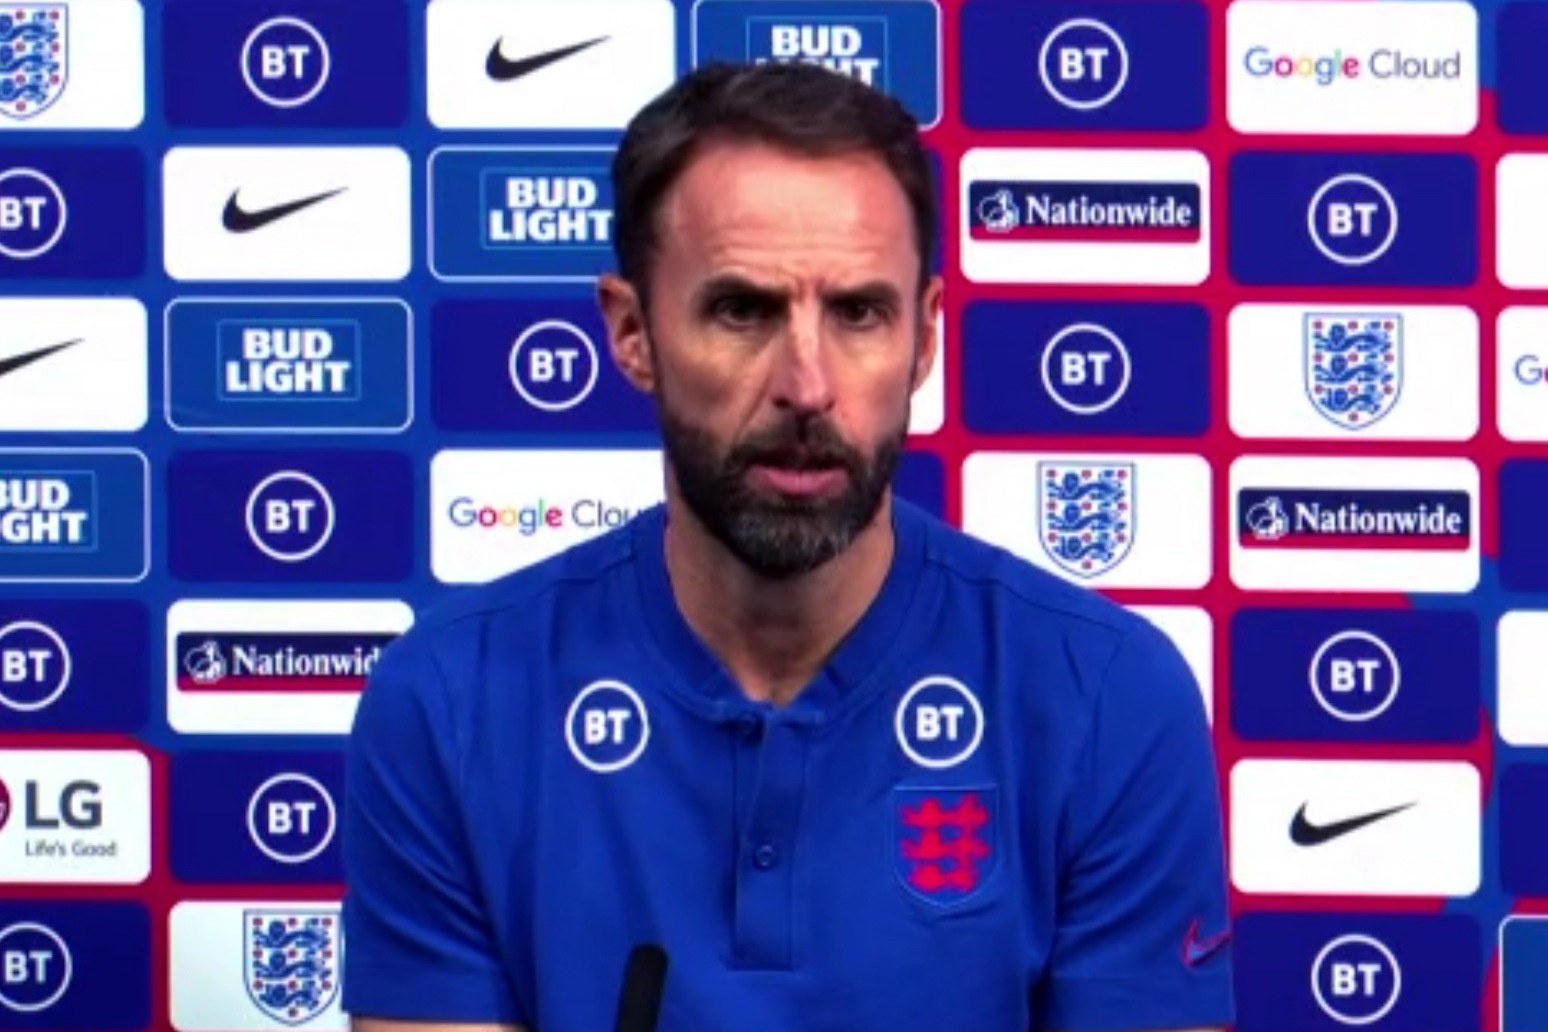 Gareth Southgate focusing on England rather than potential issues in Hungary 